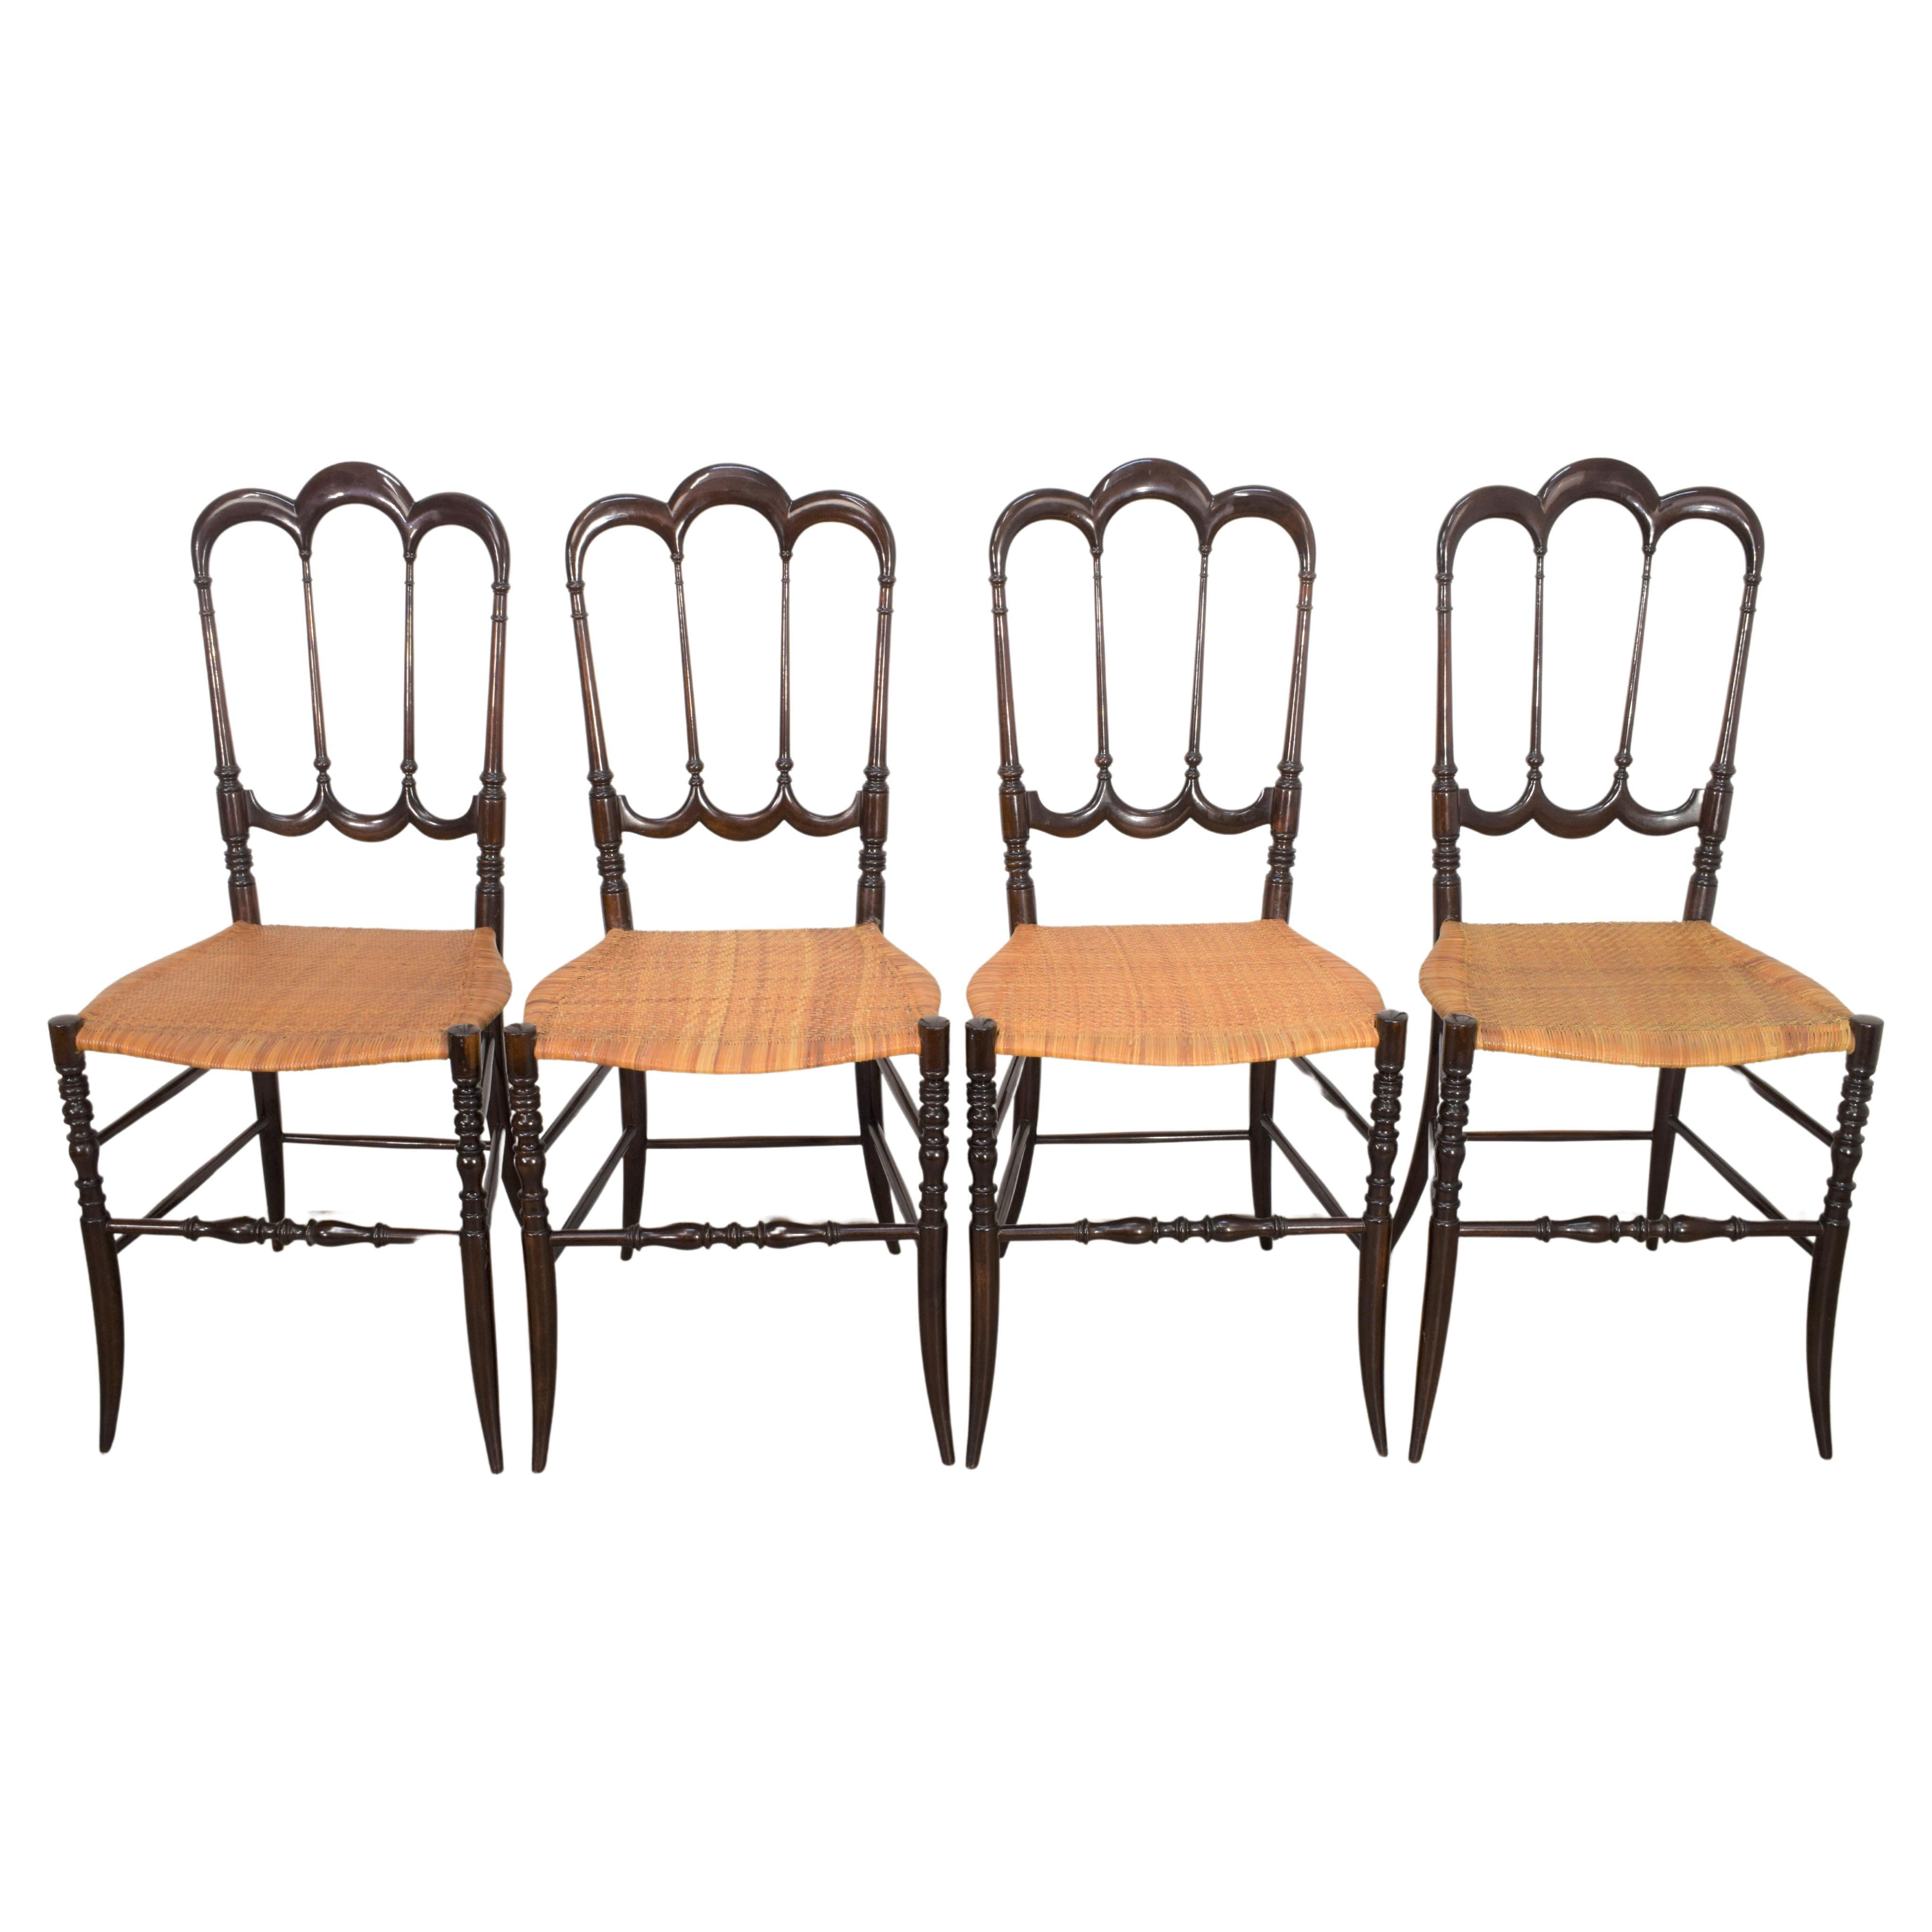 Set of 4 chairs model "tre archi" by Levaggi, Italy, 1950s